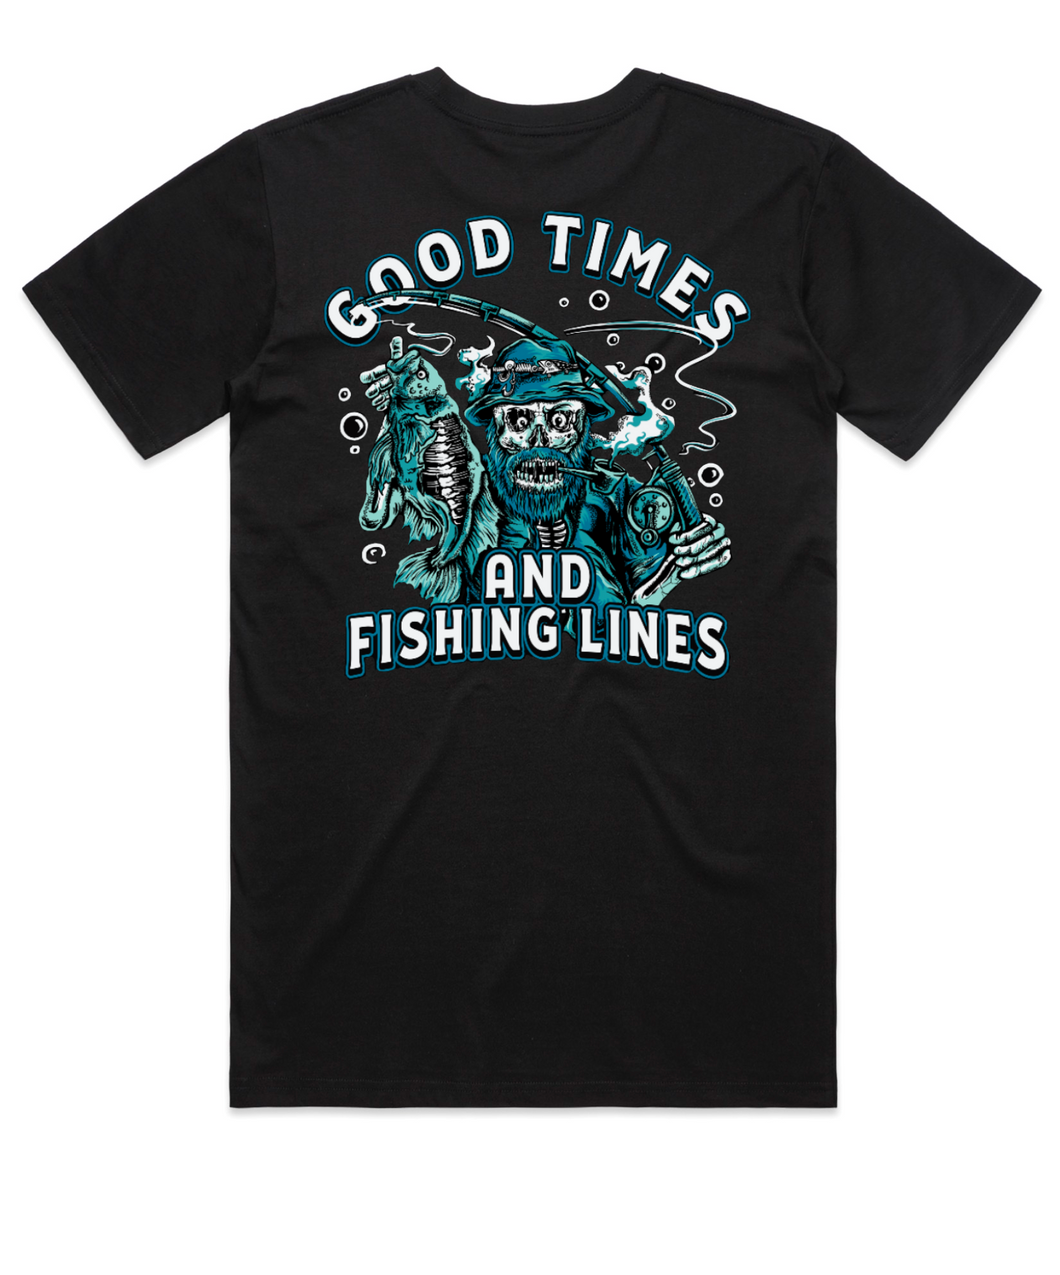 Good Times And Fishing Lines - Mens